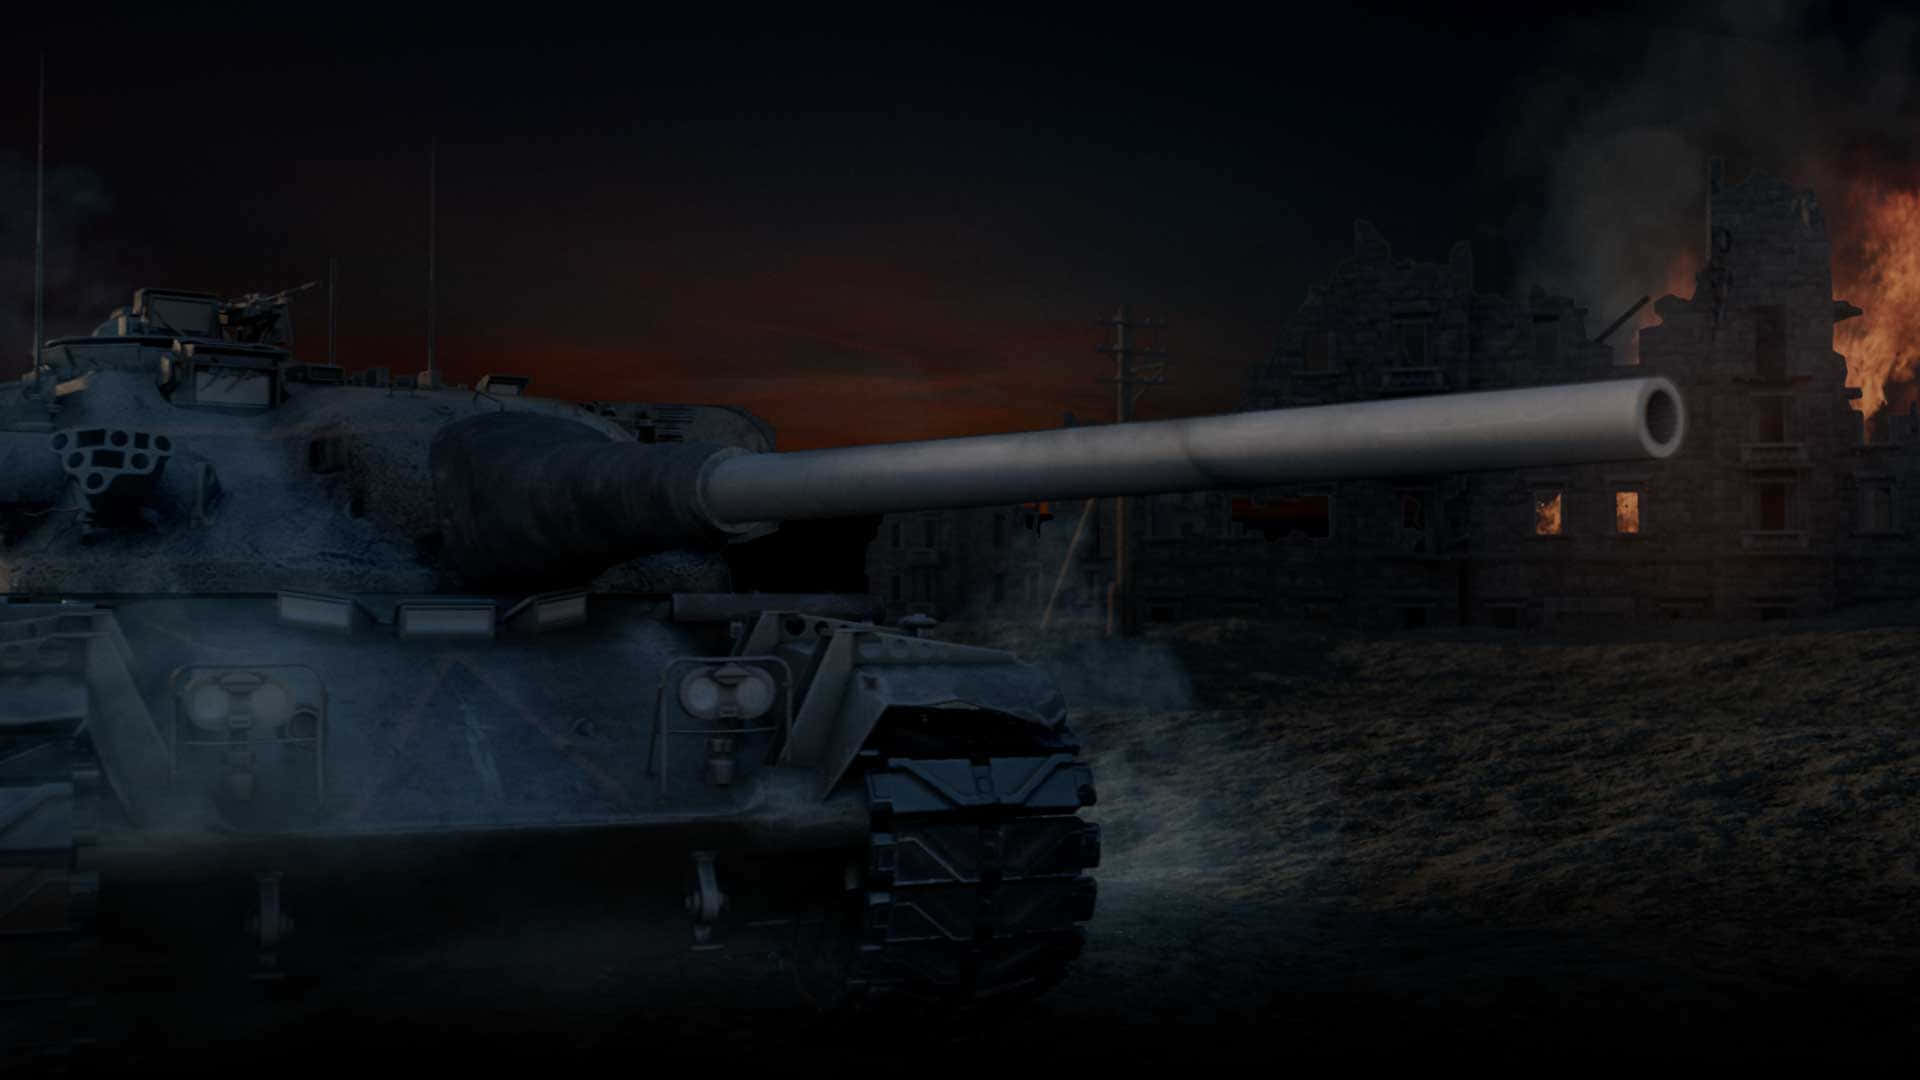 Experience the power and protection of a Tank